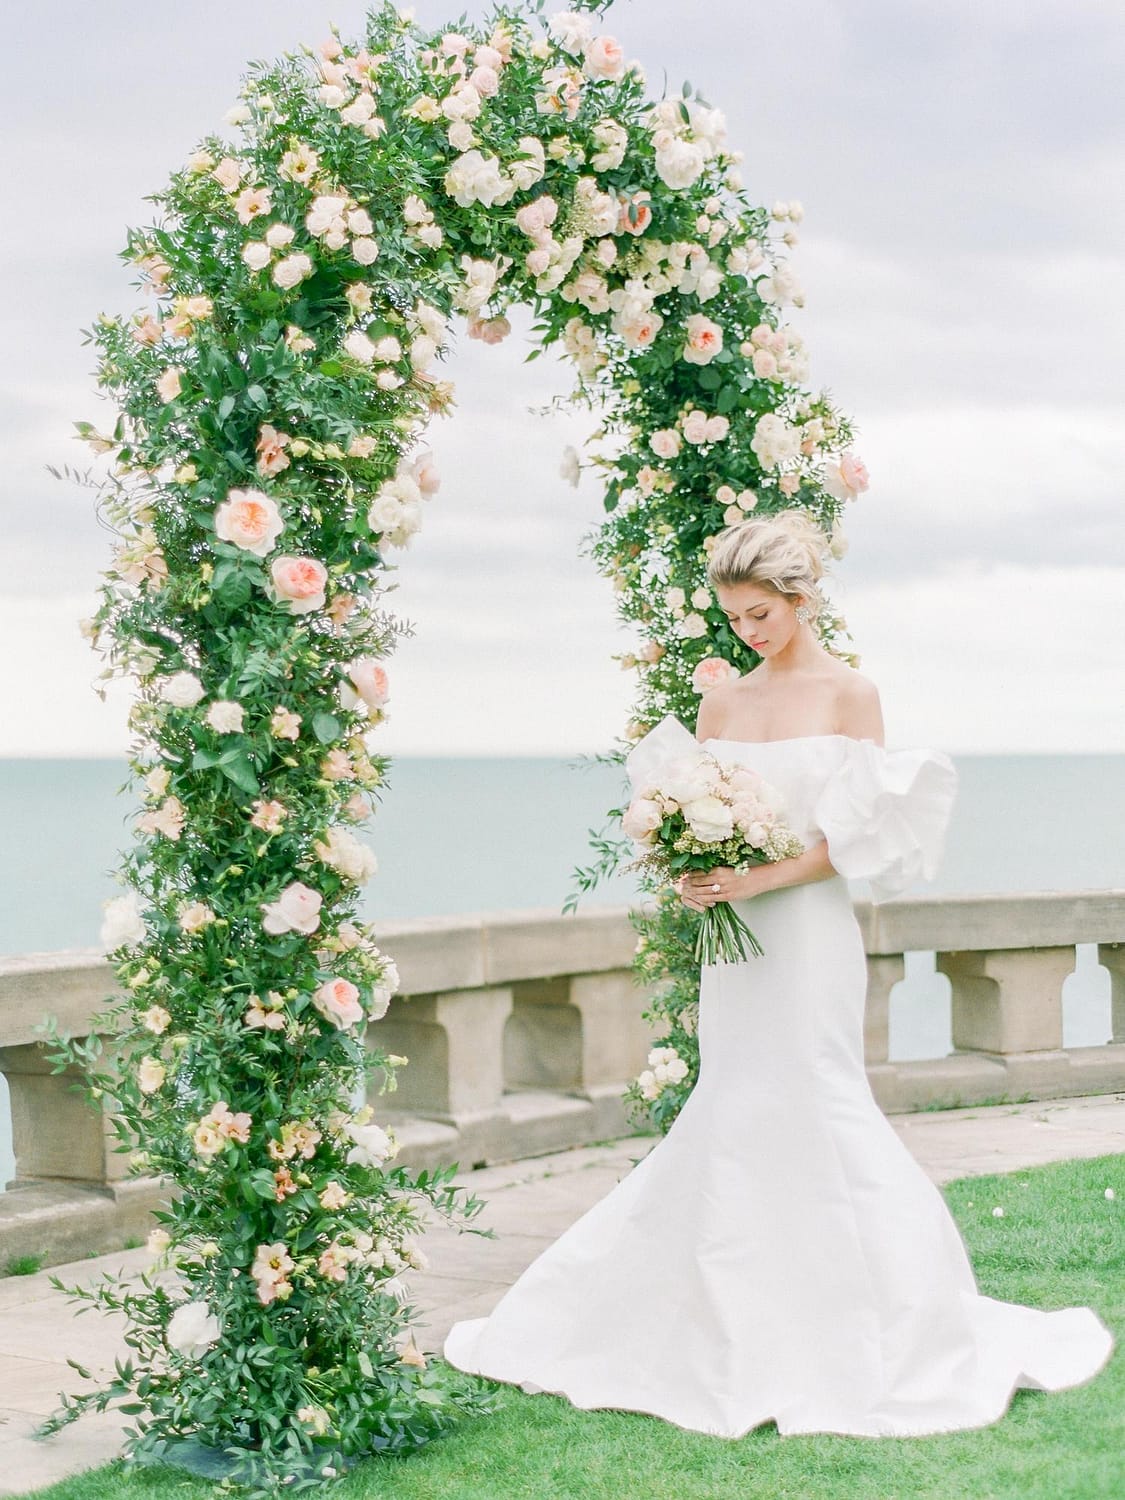 Bride With Floral Wedding Arch And Bridal Bouquet